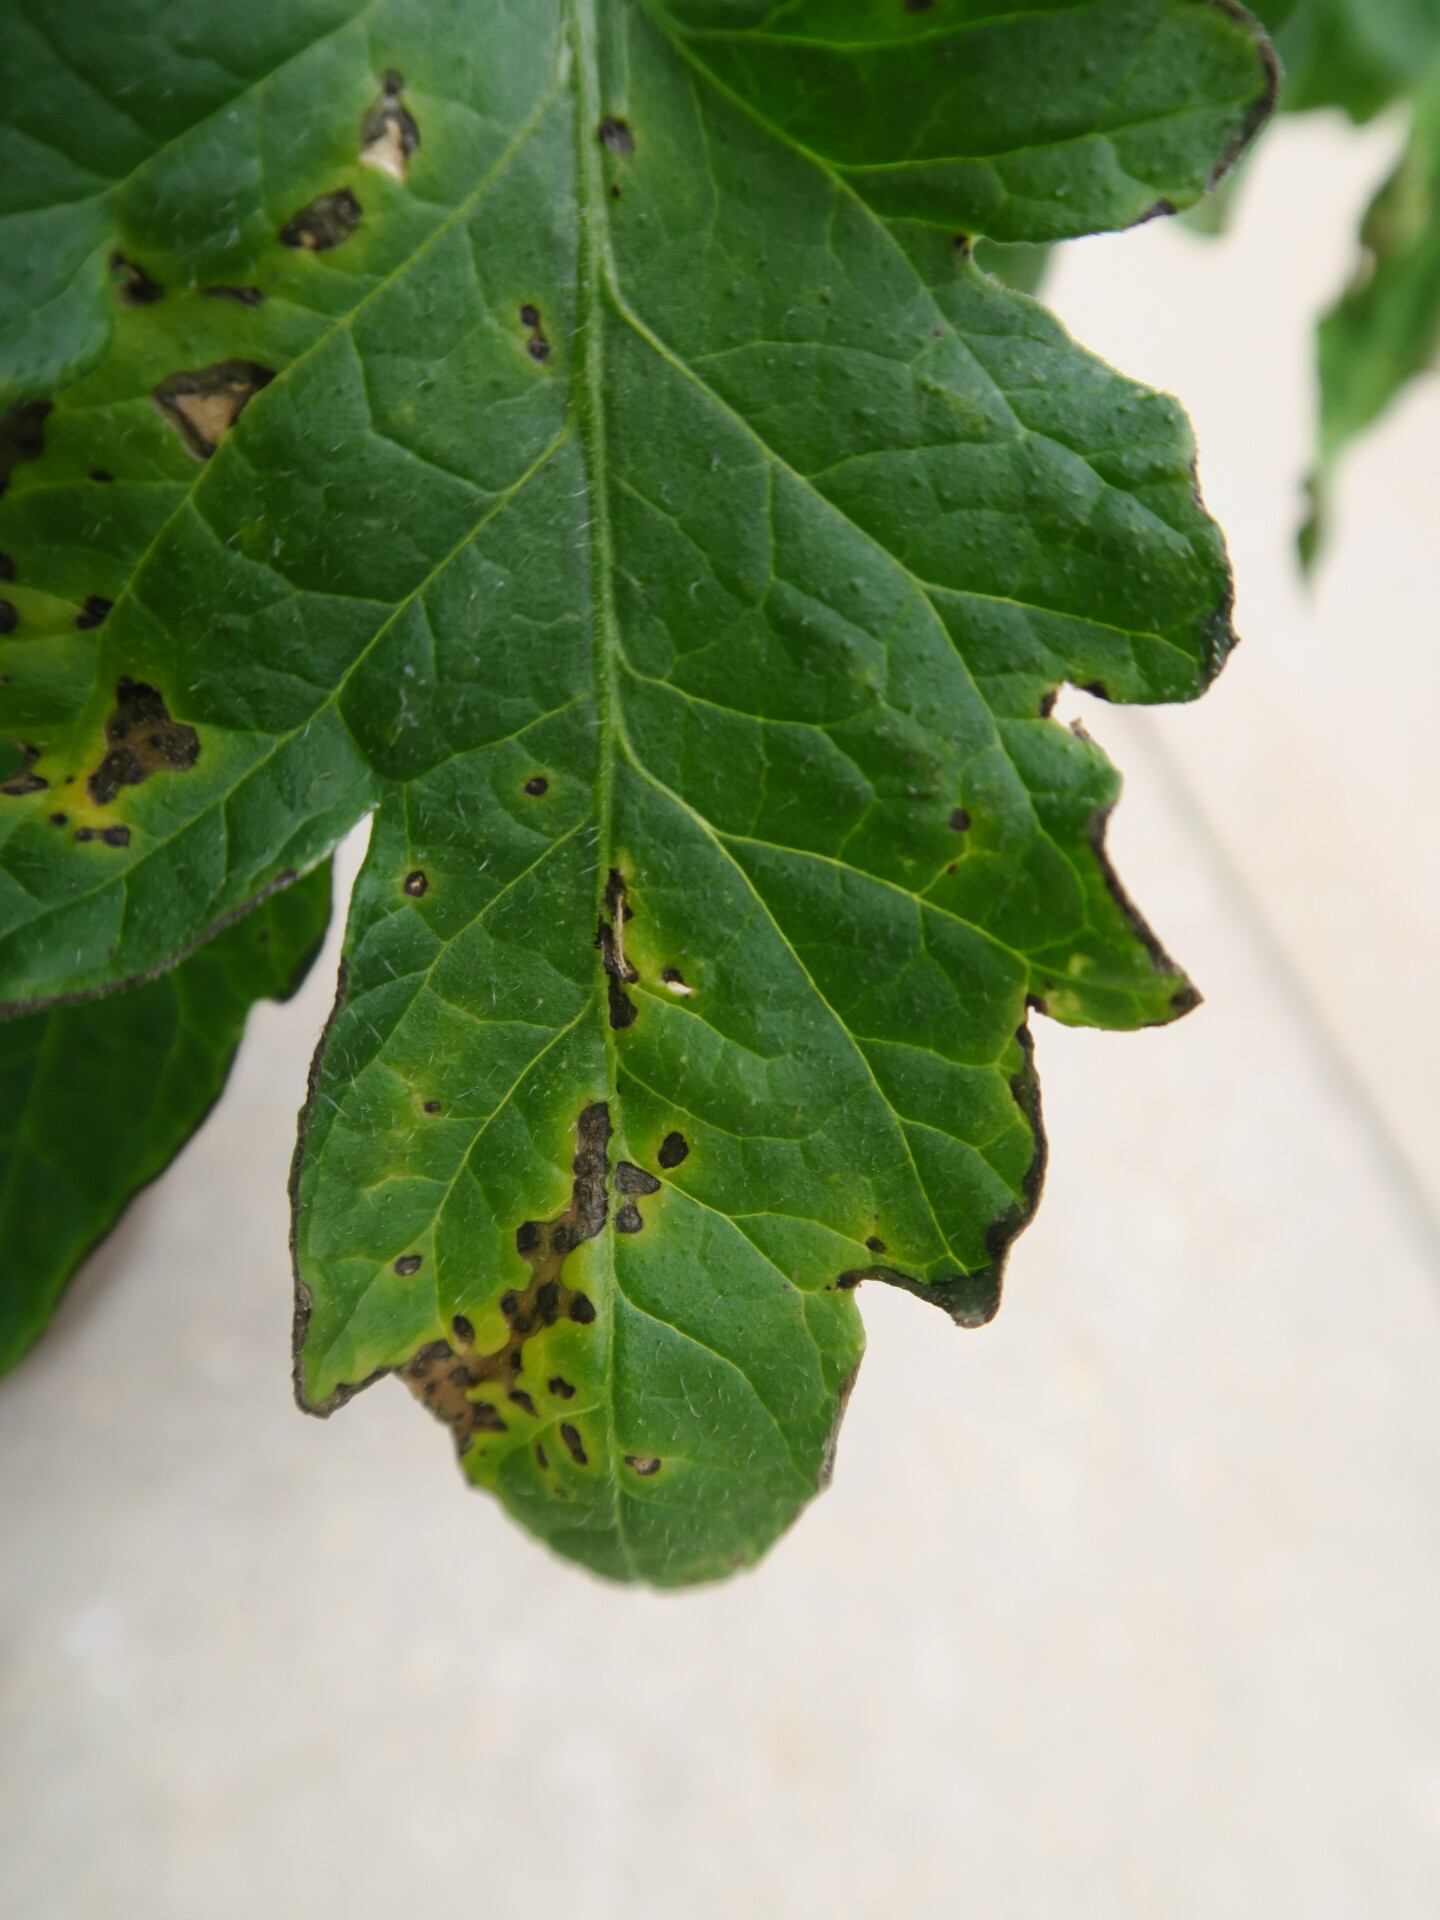 Lesions of bacterial speck of tomato on leaf.